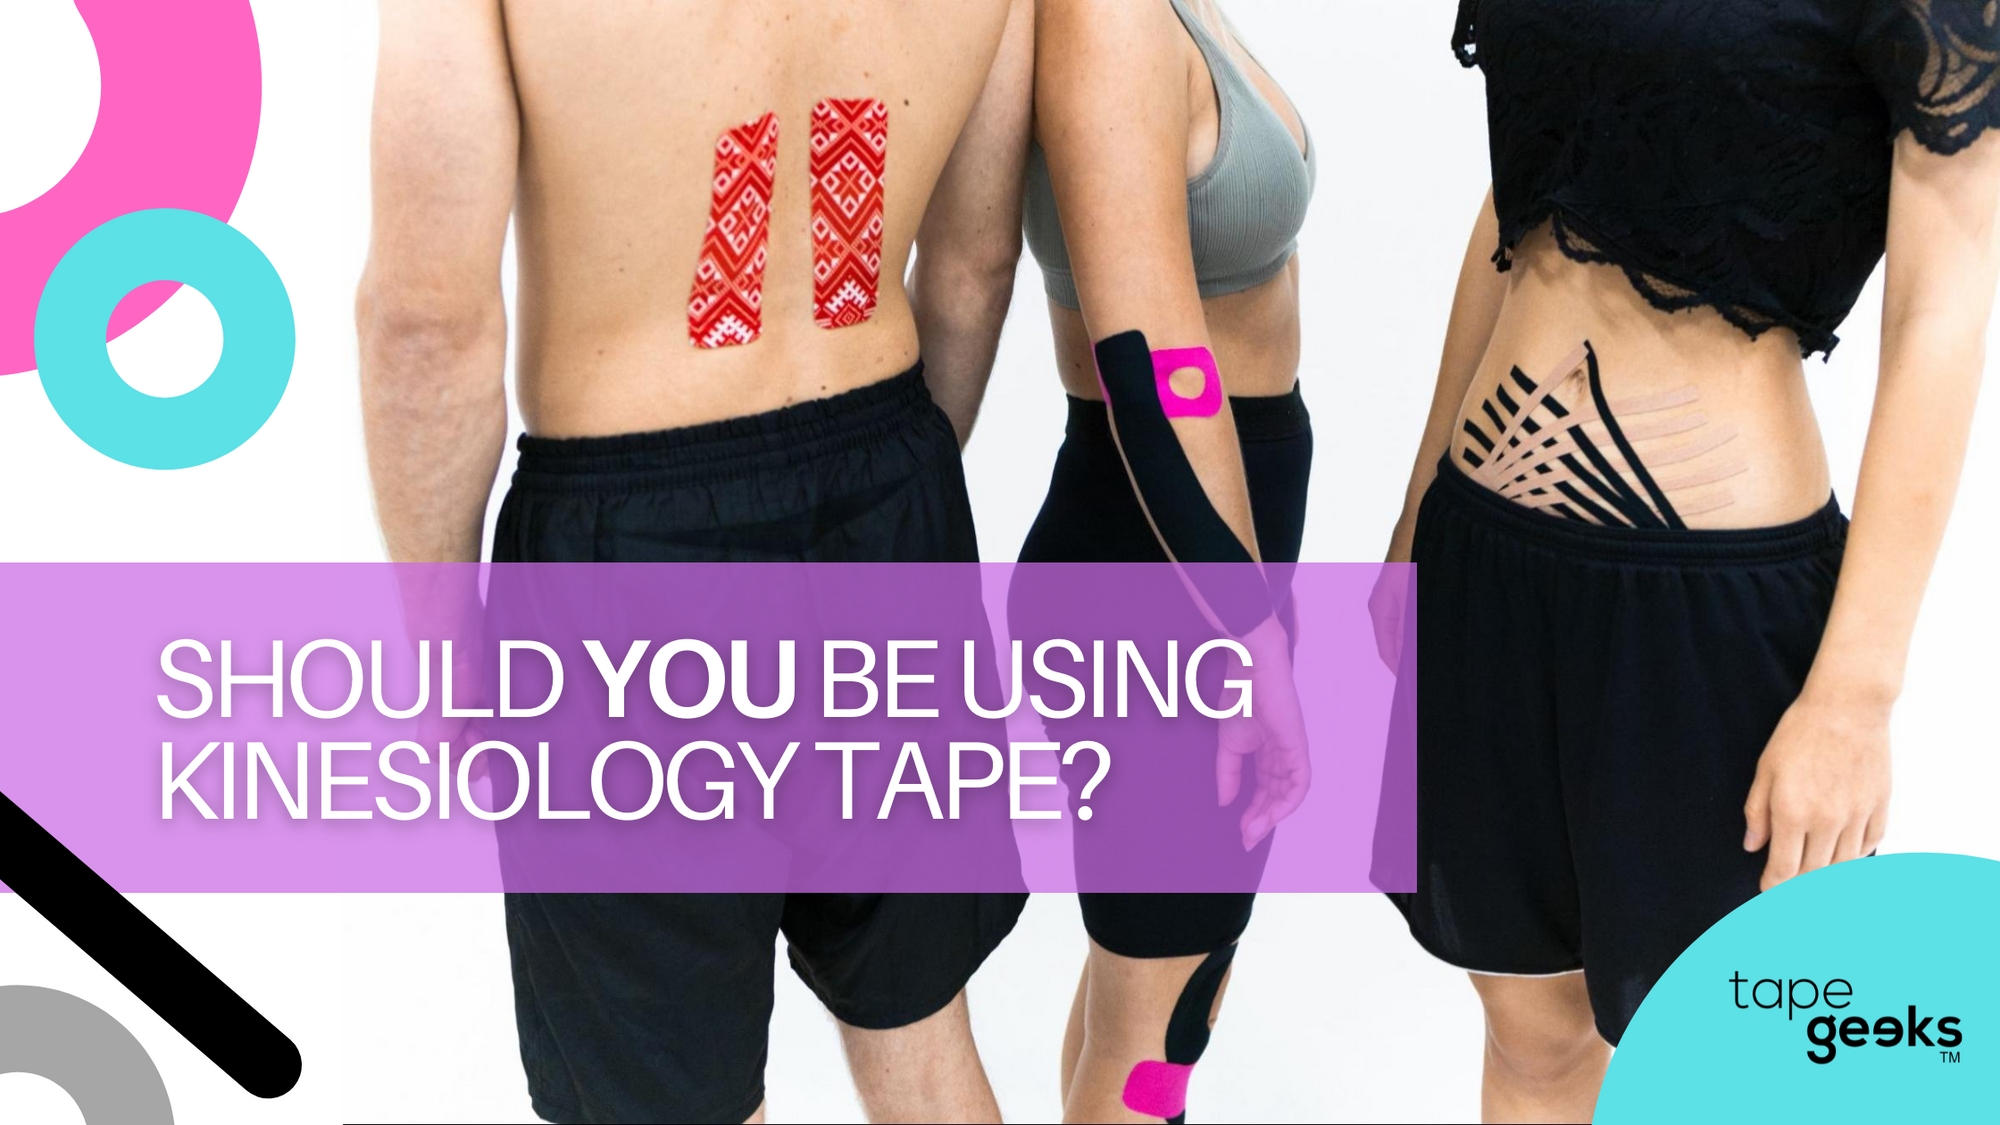 Who should NOT be using kinesiology tape?